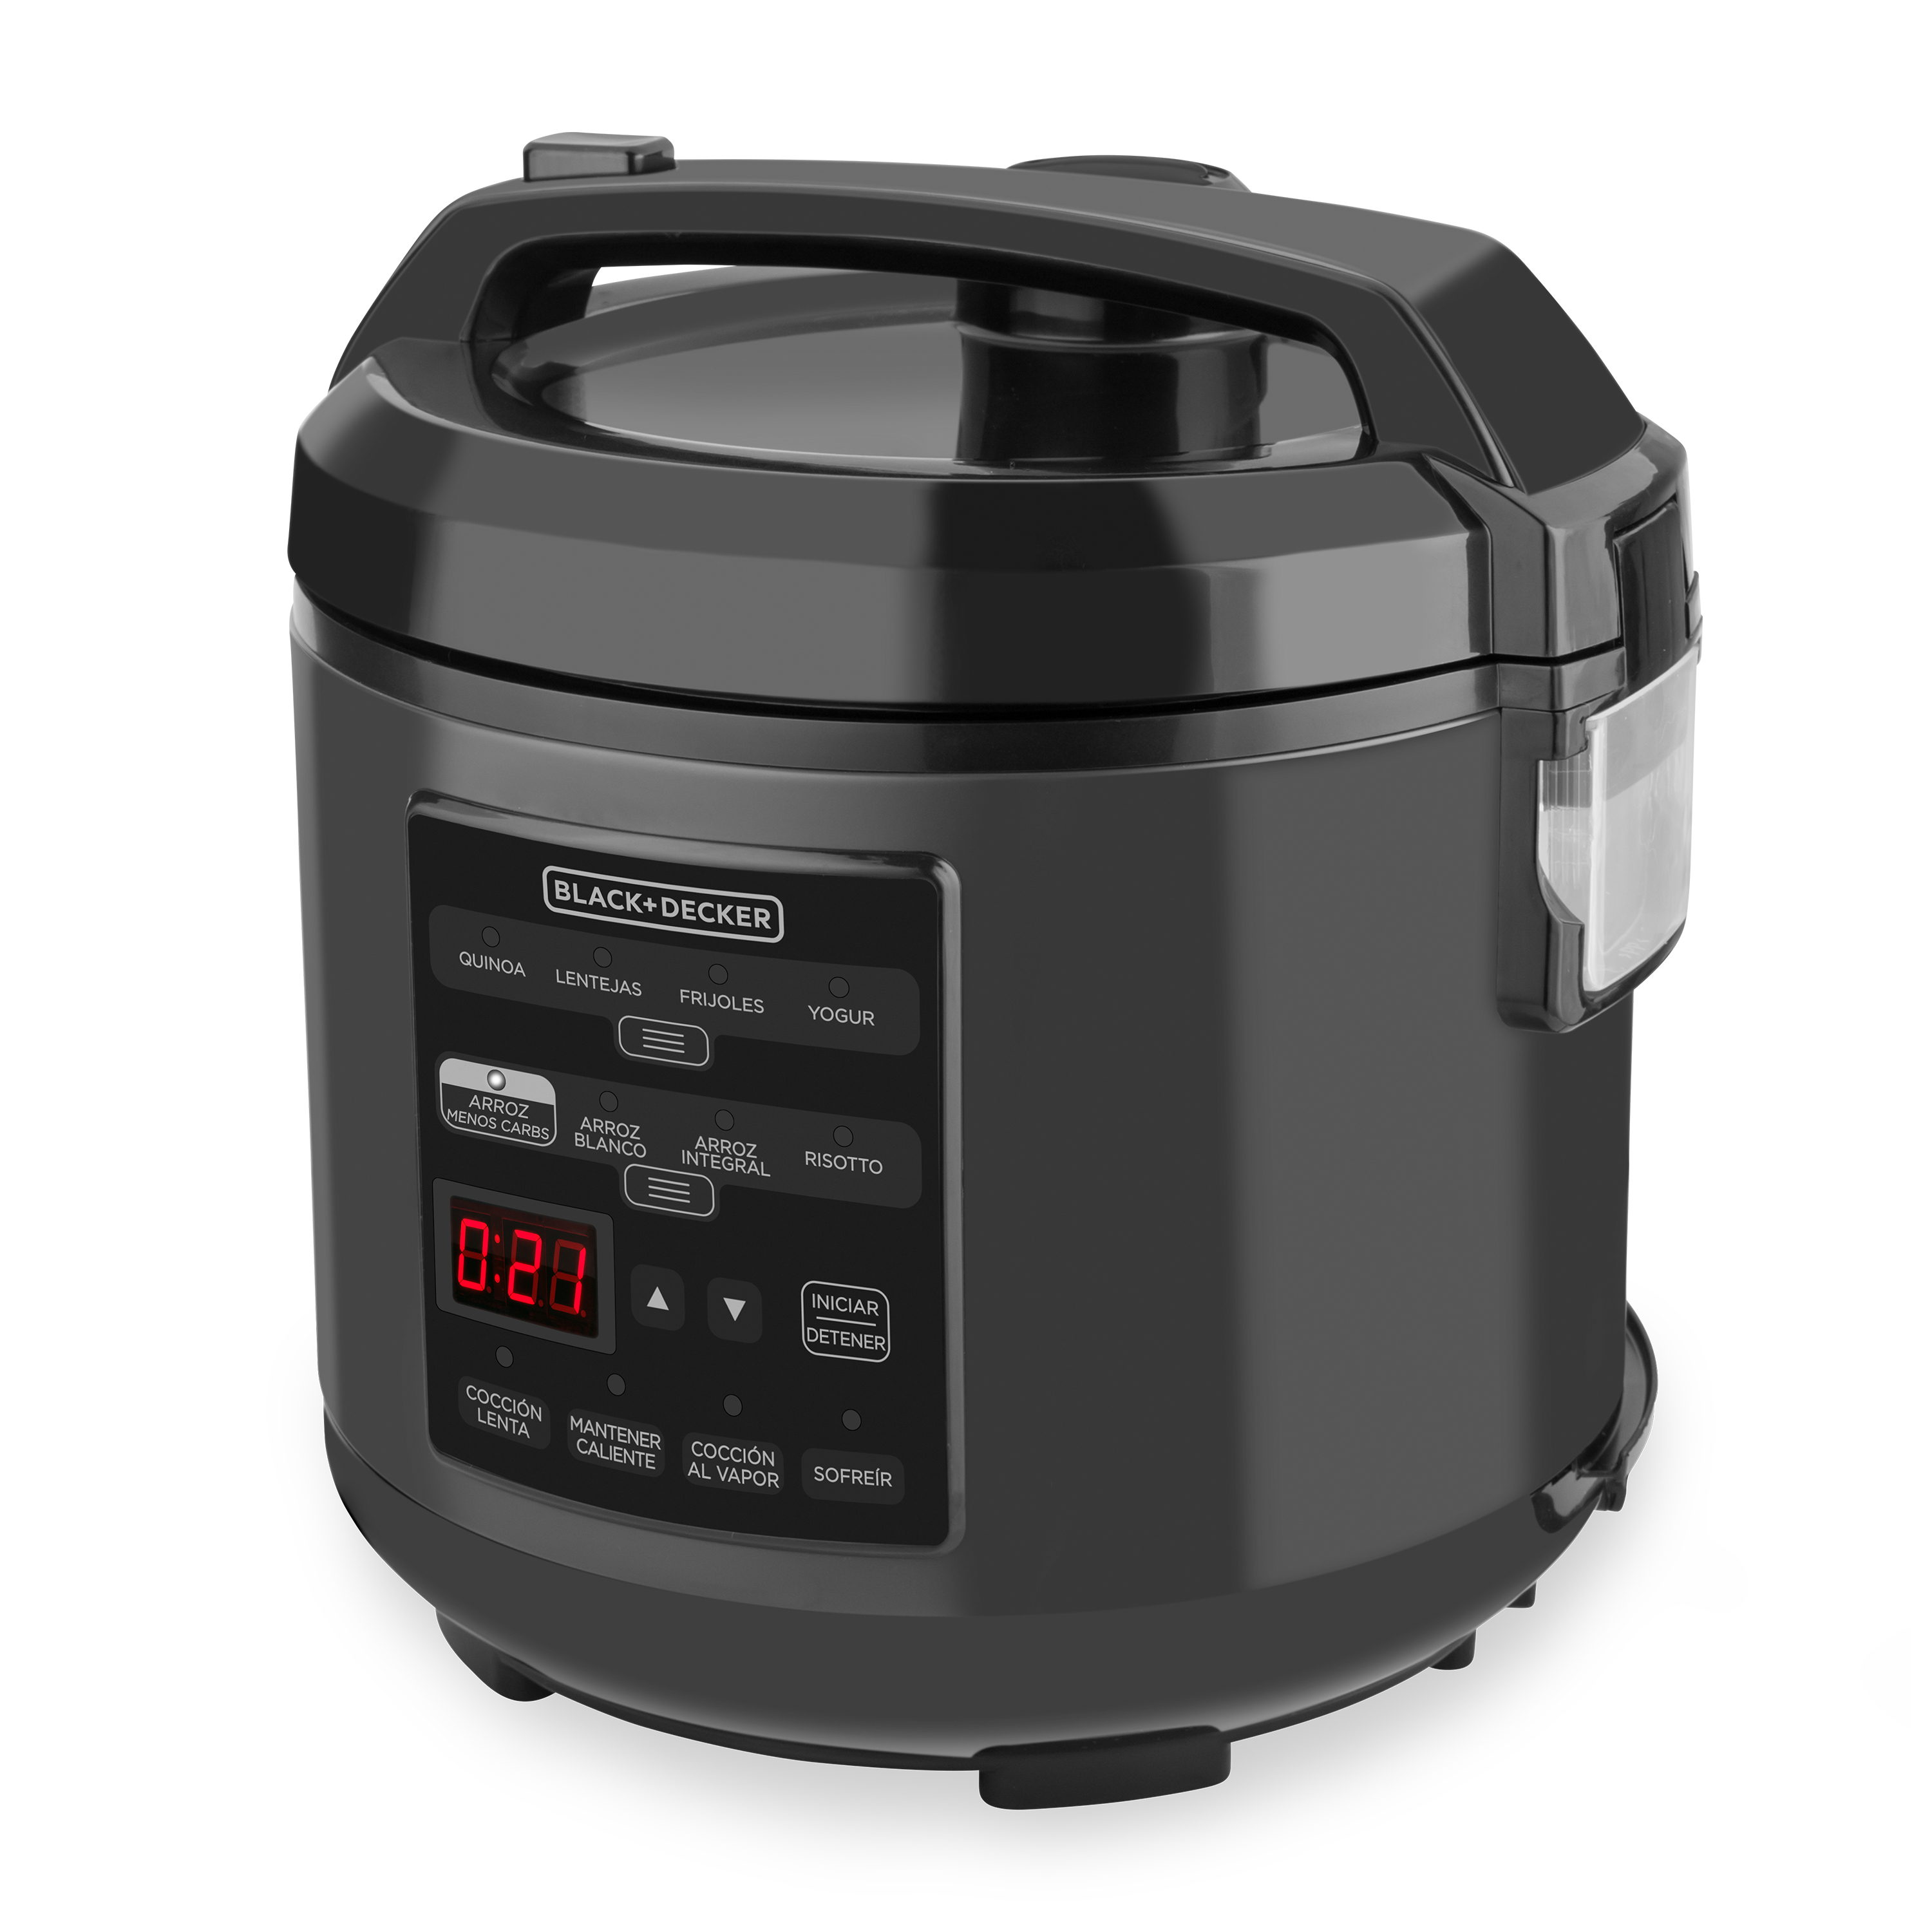 https://s7cdn.spectrumbrands.com/~/media/LatinAmerica/BlackAndDecker/Imagenes/Producto_High_Res/Cooking/Multicooker/MCH14AR/MCH14AR_LATERAL_1.jpg